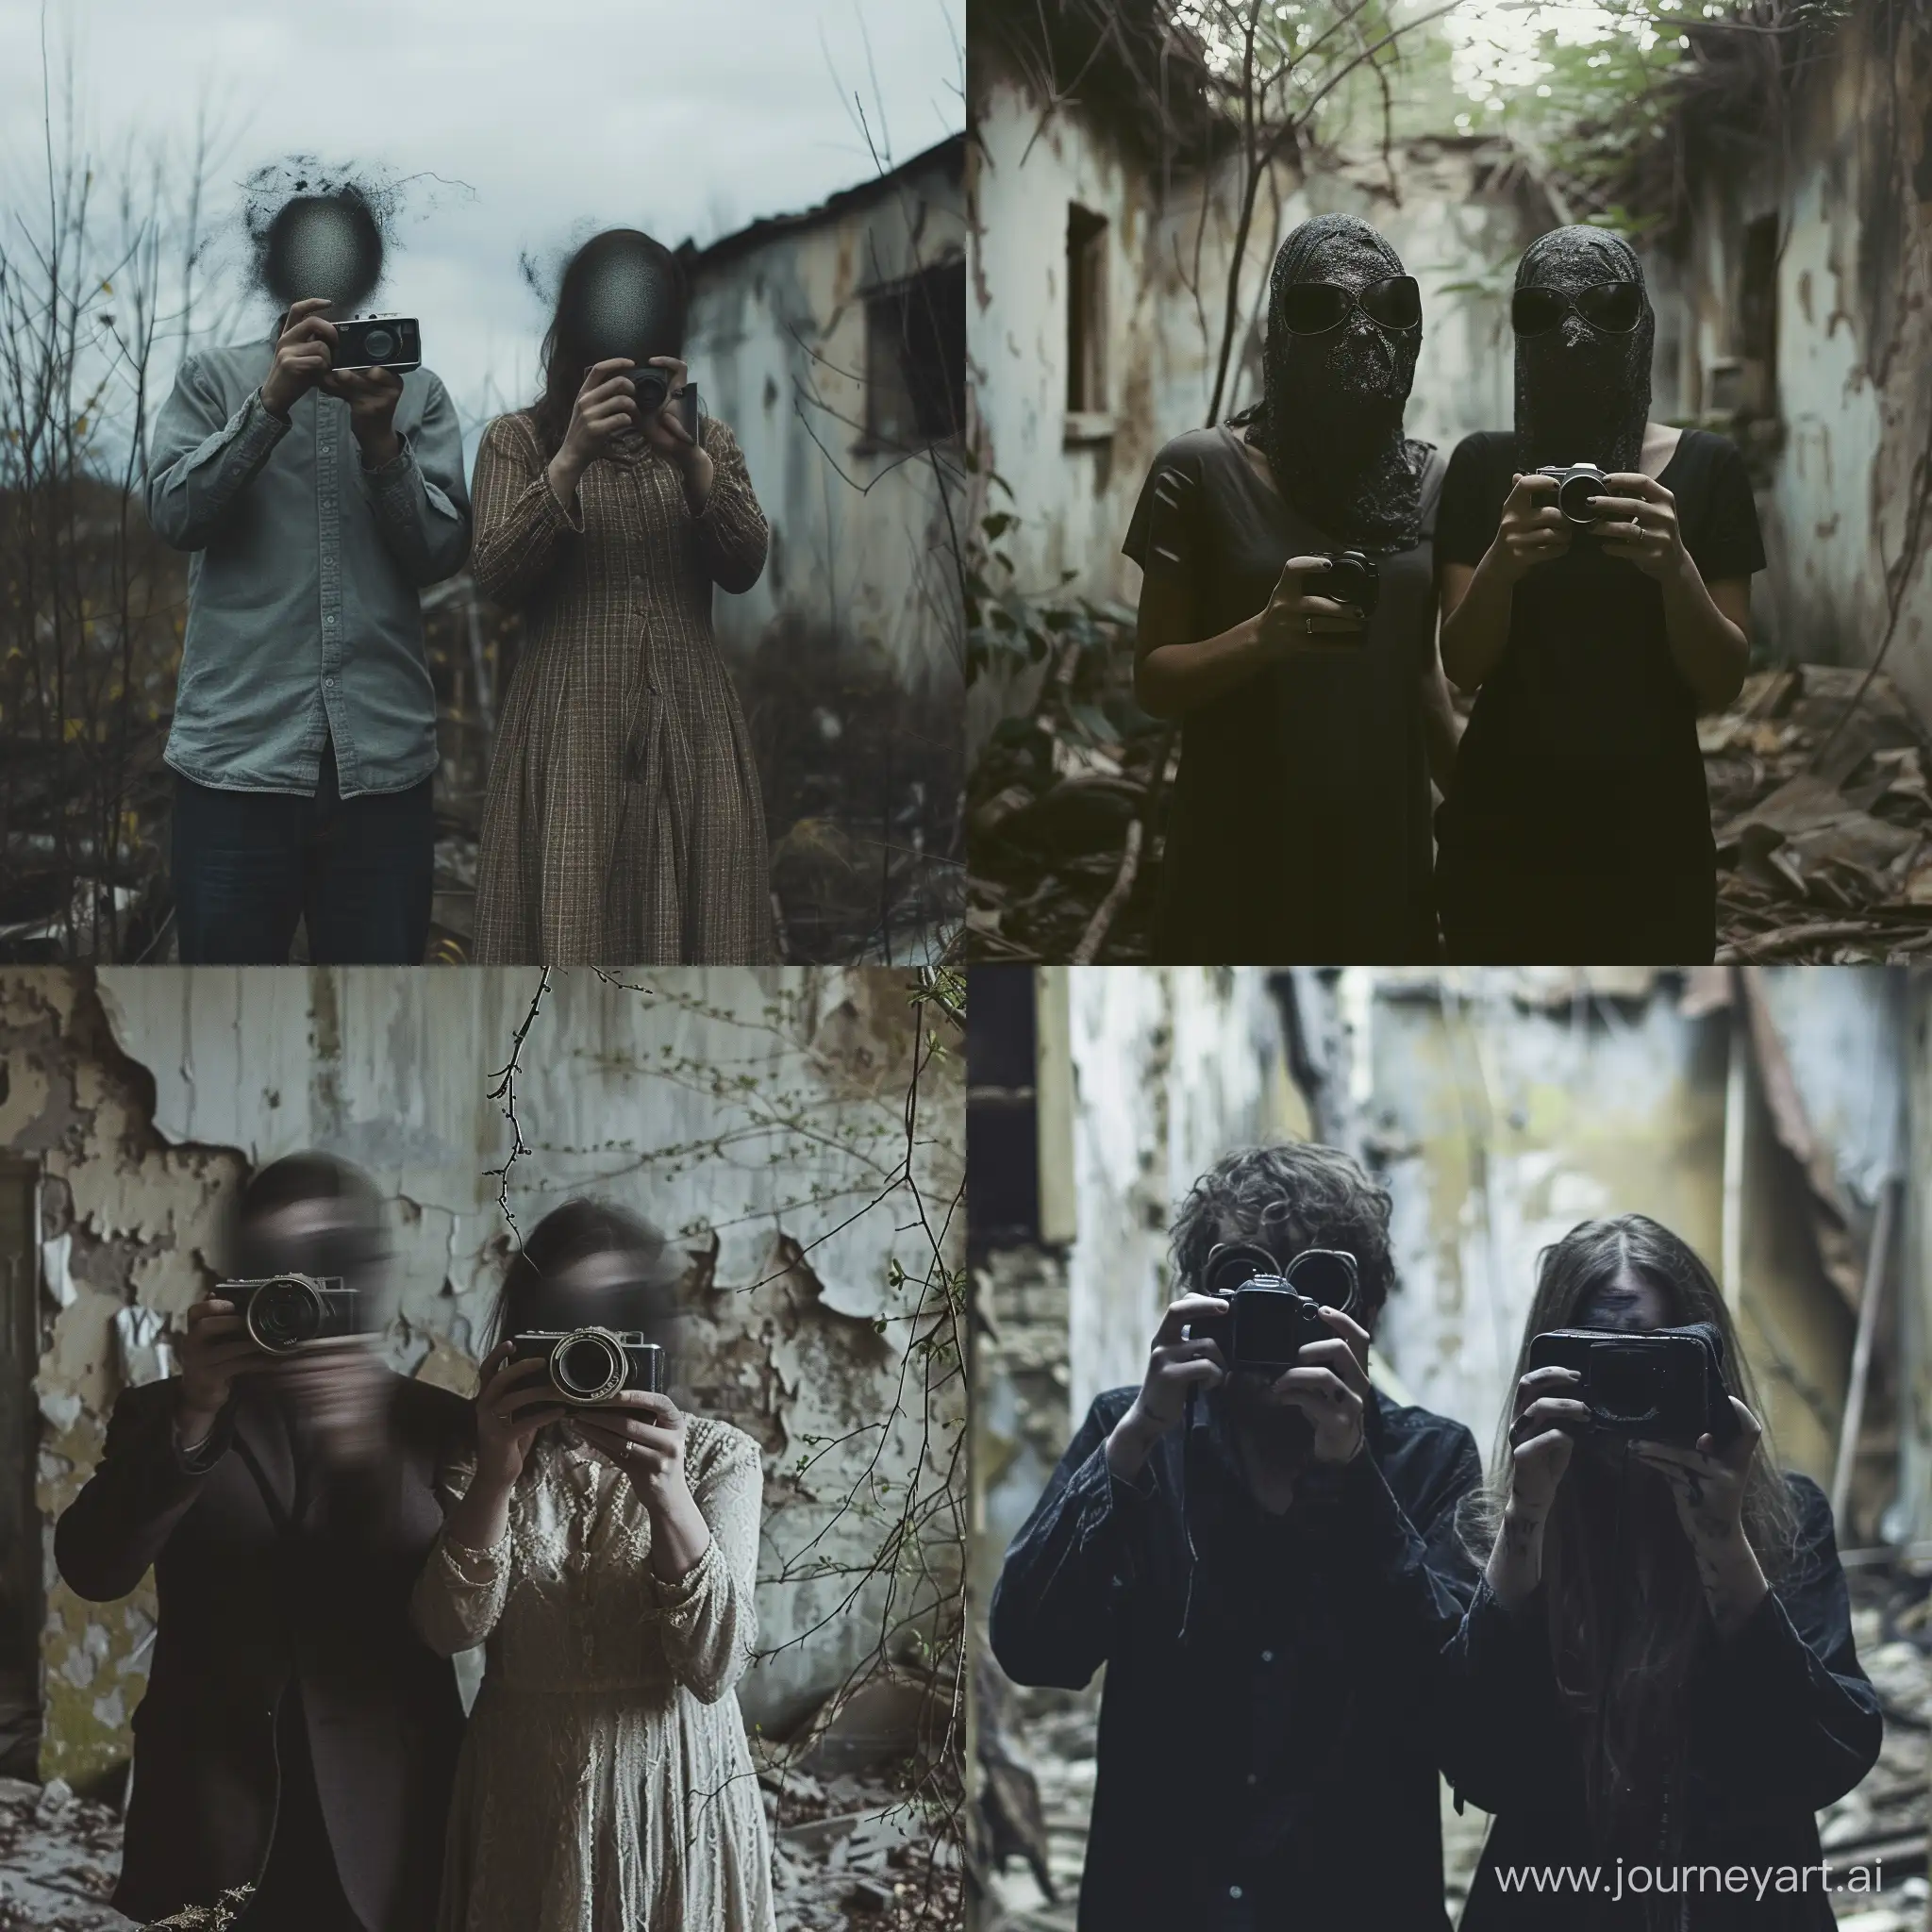 A strange husband and wife with blurry faces taking pictures in an abandoned environment